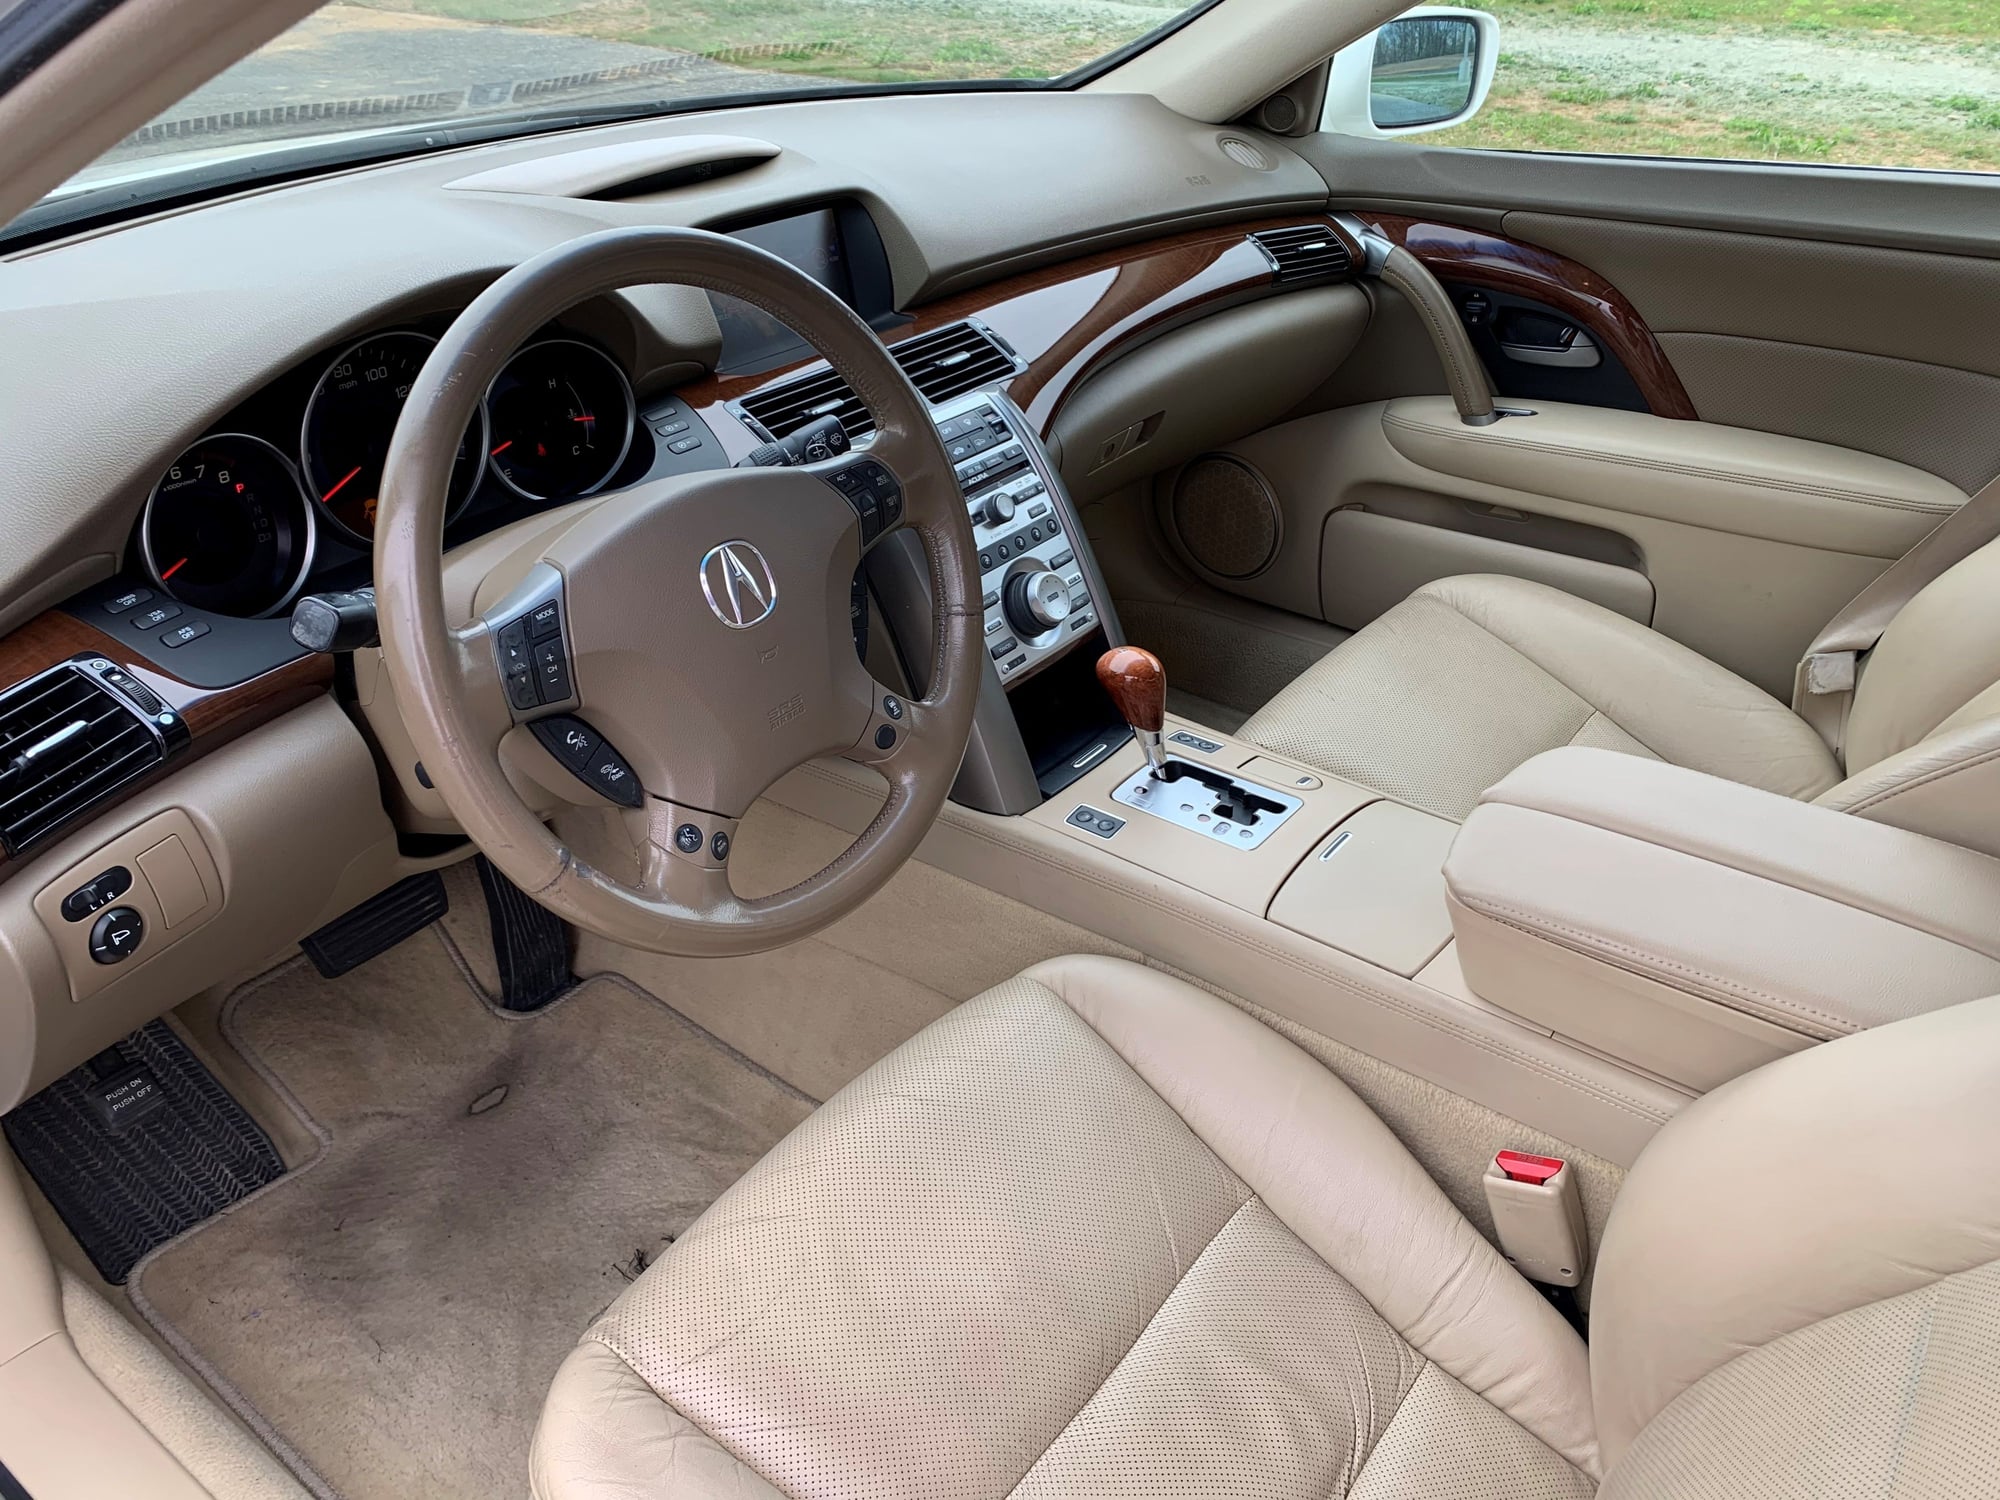 2006 Acura RL - FS: 2006 Acura RL Technology For Sale (Eastern, Pennsylvania) - Used - VIN JH4KB16586C005819 - 189,000 Miles - 6 cyl - AWD - Automatic - Sedan - White - Orefield, PA 18069, United States